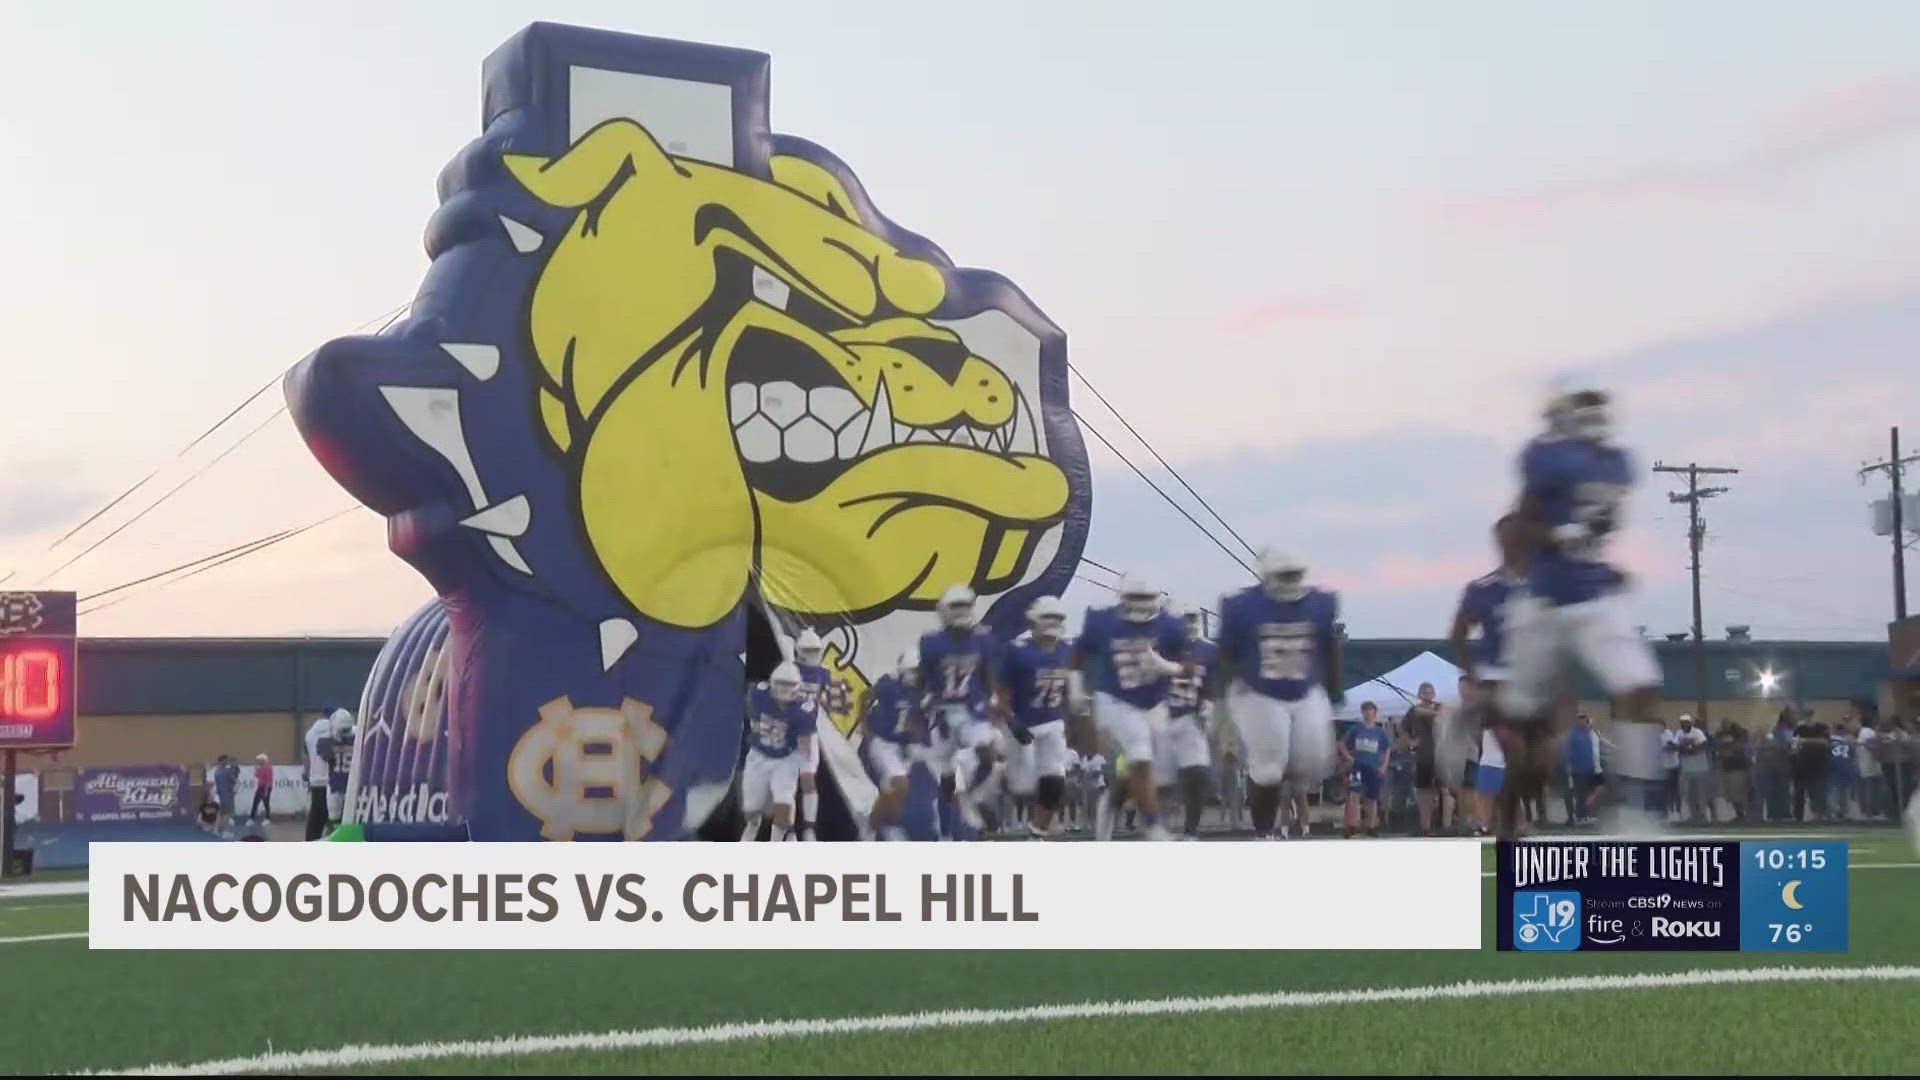 For all the best high school football highlights, check out Under the Lights at 10PM on CBS19!